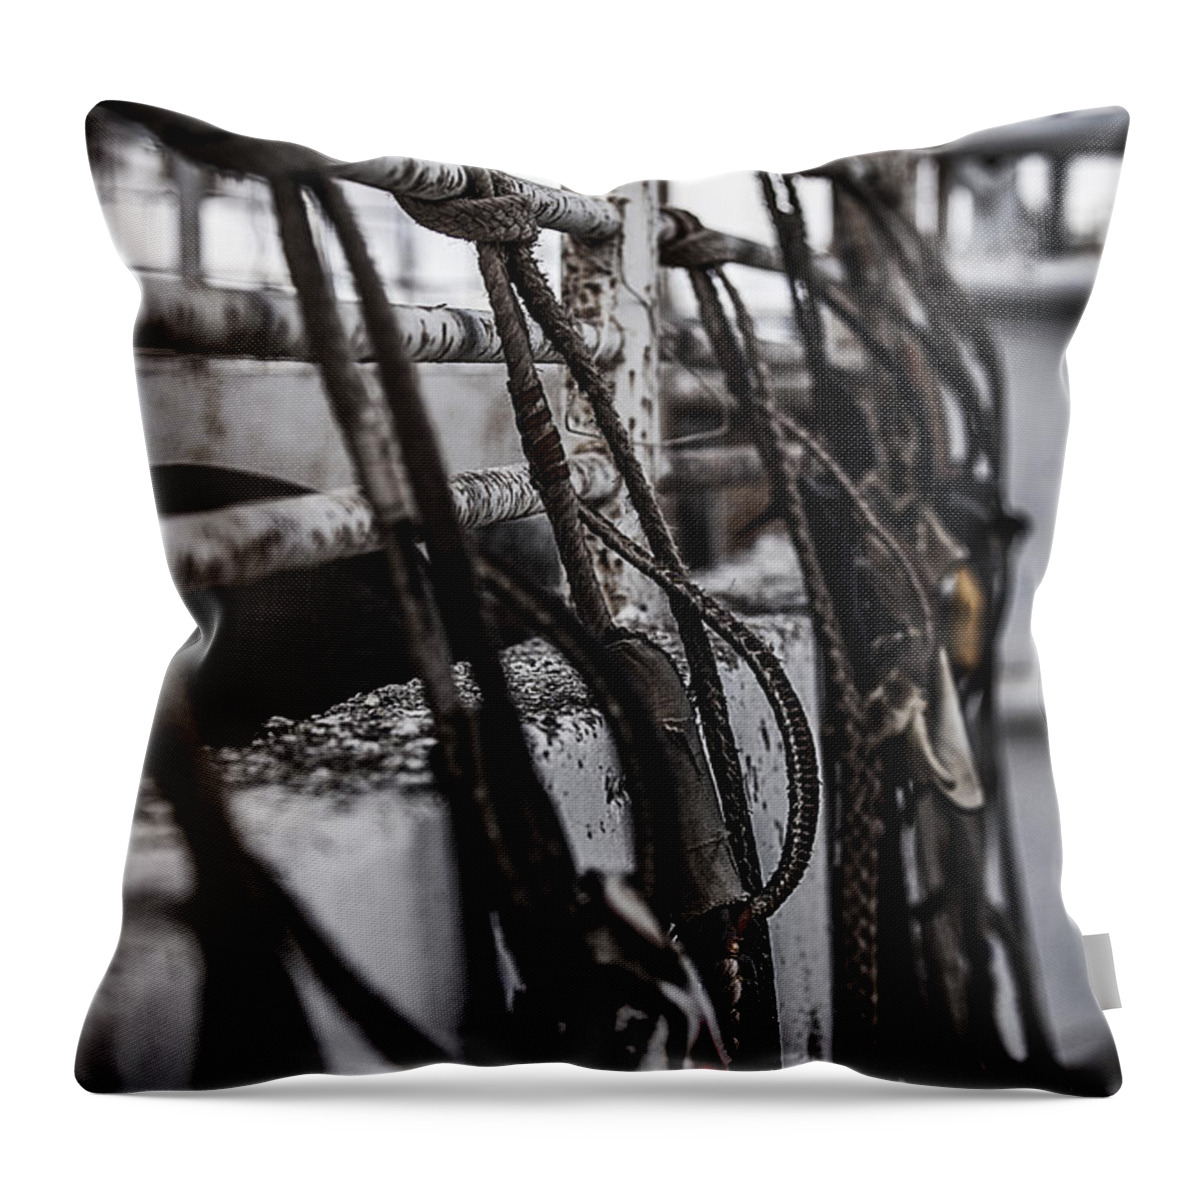 Landscapes Throw Pillow featuring the photograph Bull Ropes by Amber Kresge